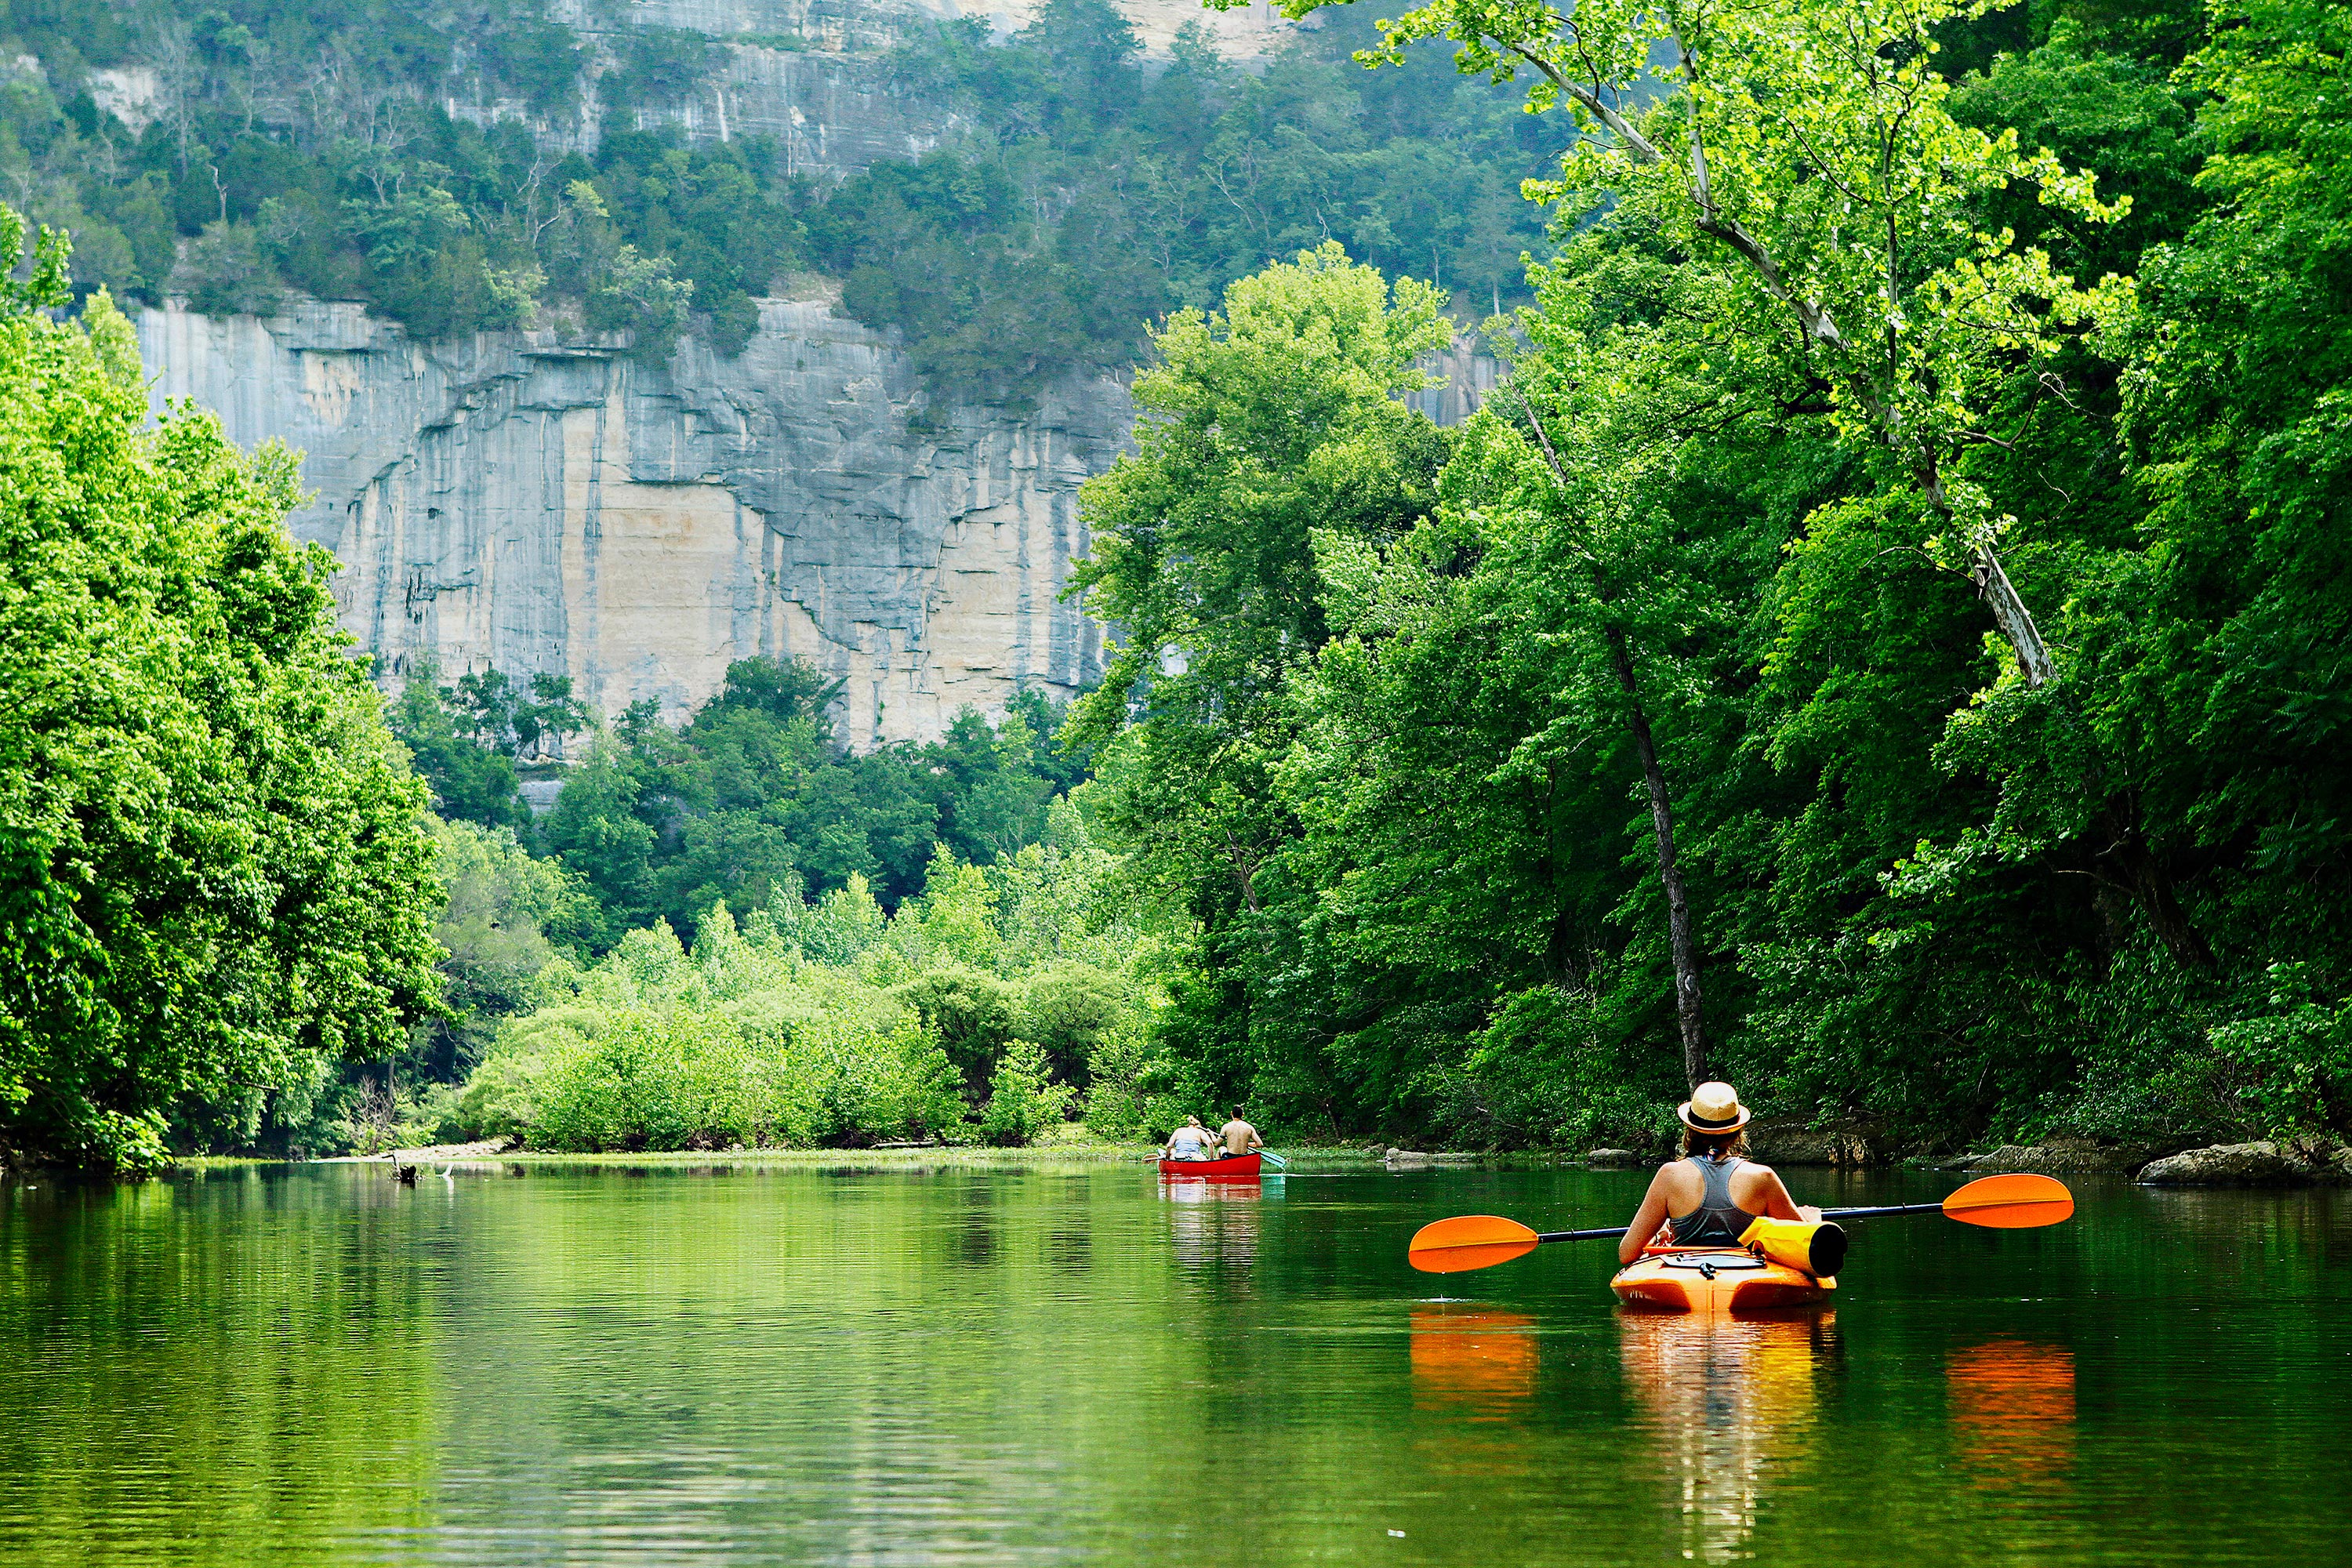 Top 10 Things to Do in Arkansas